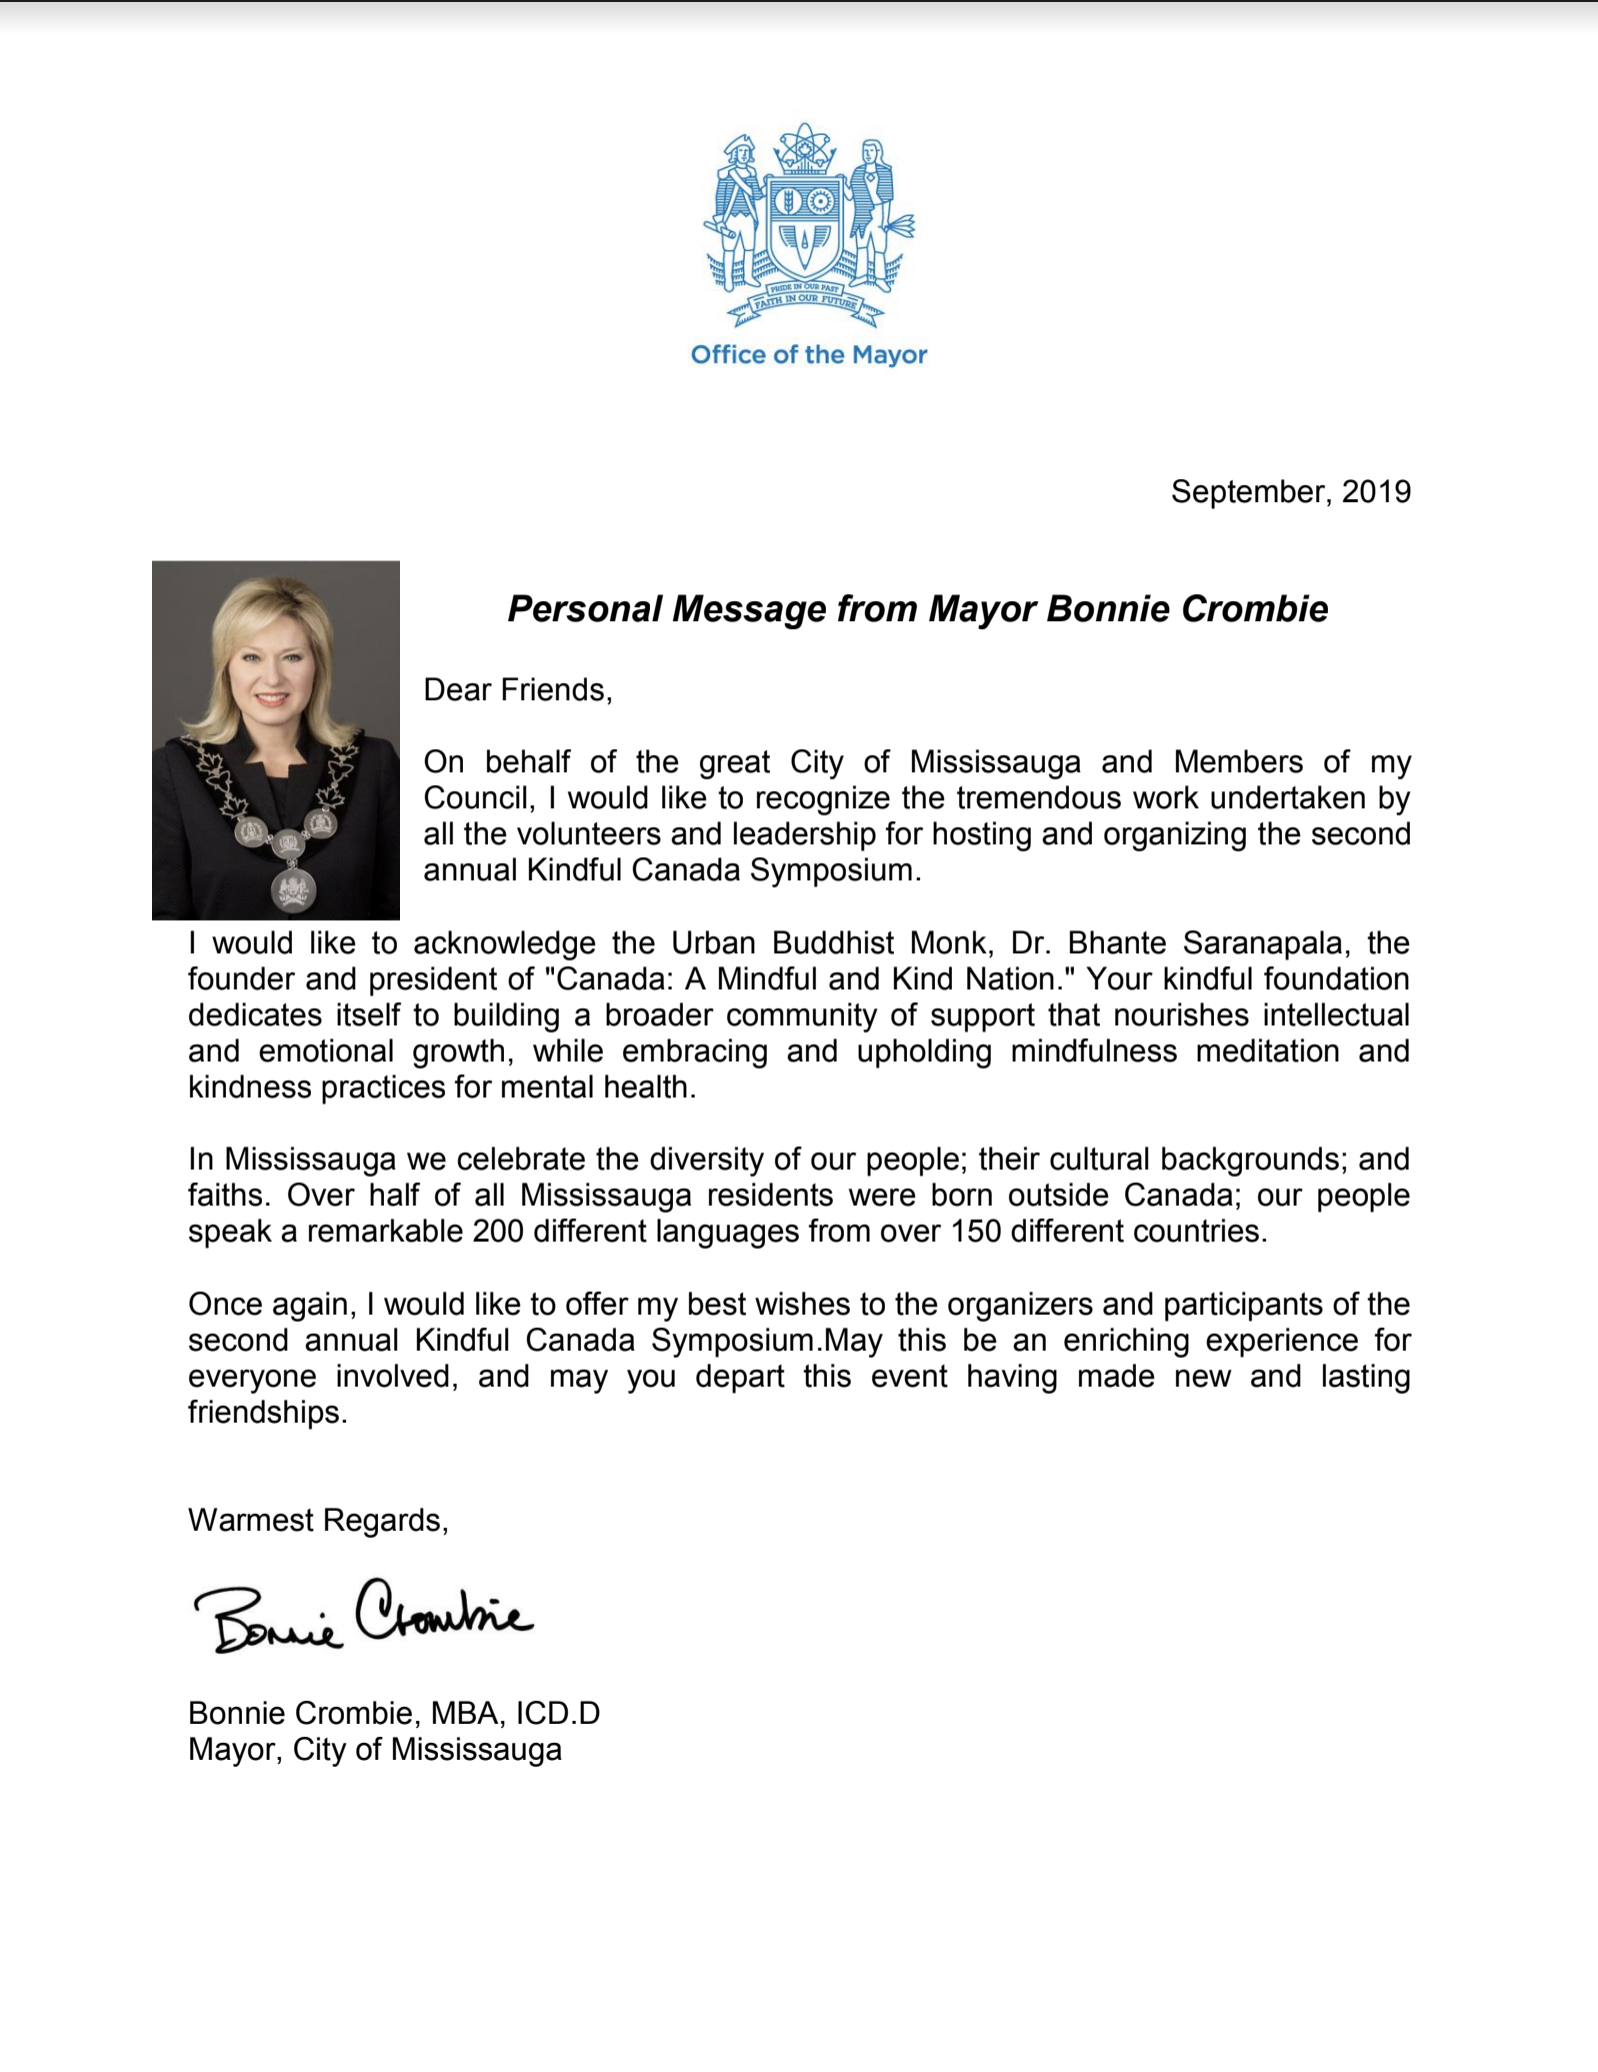 Special Greeting Message from the Mayor Bonnie Crombie